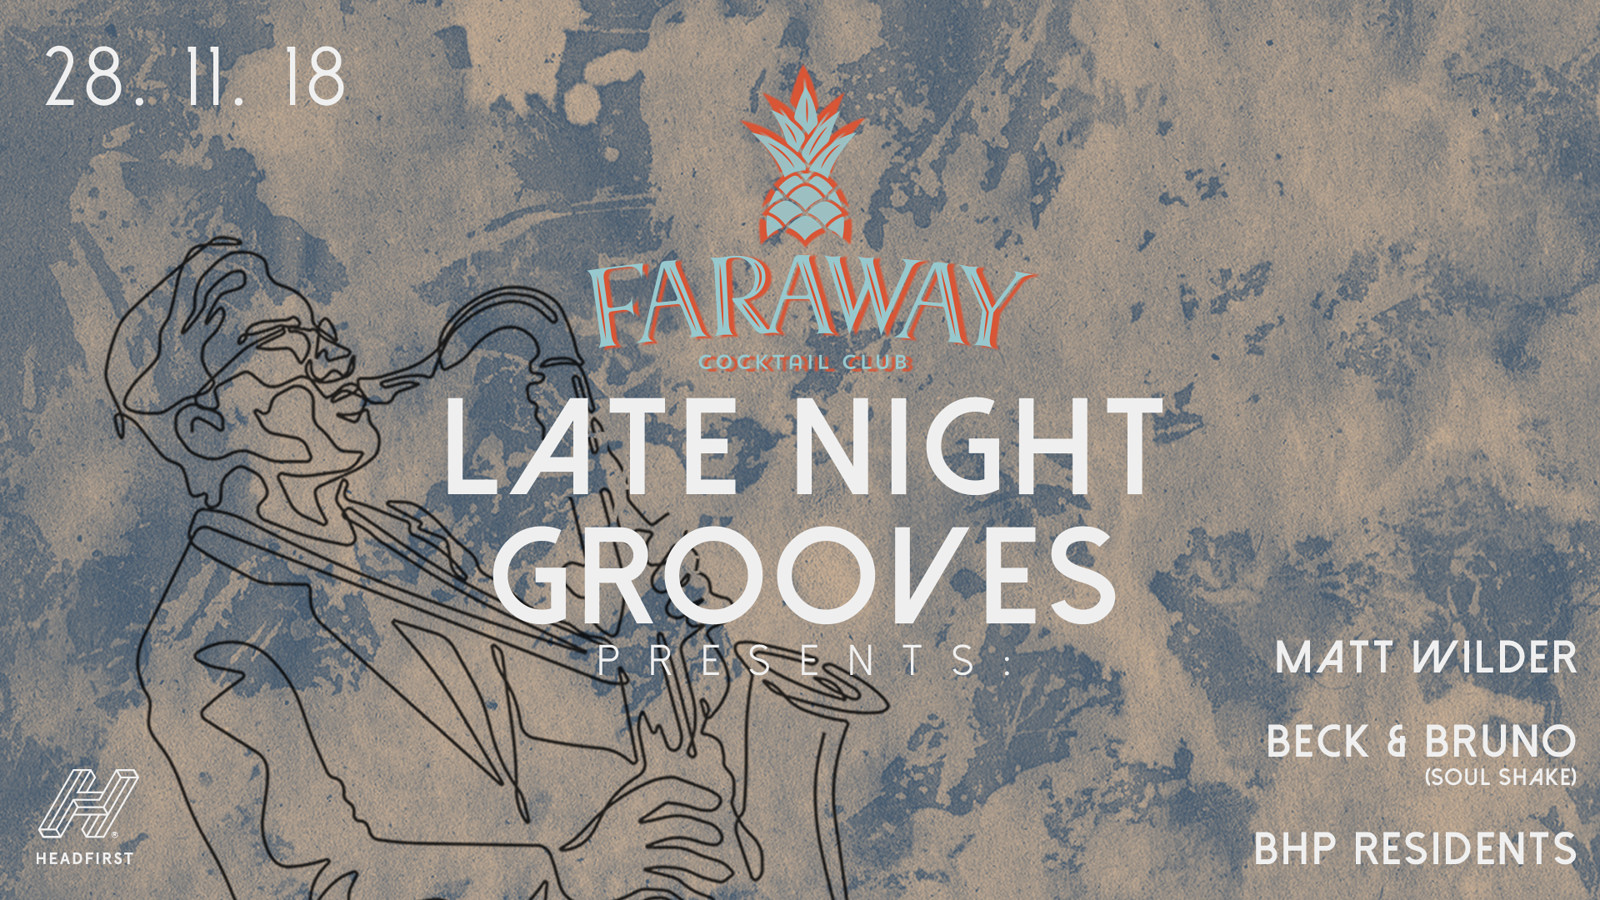 Late Night Grooves at Faraway Cocktail Club